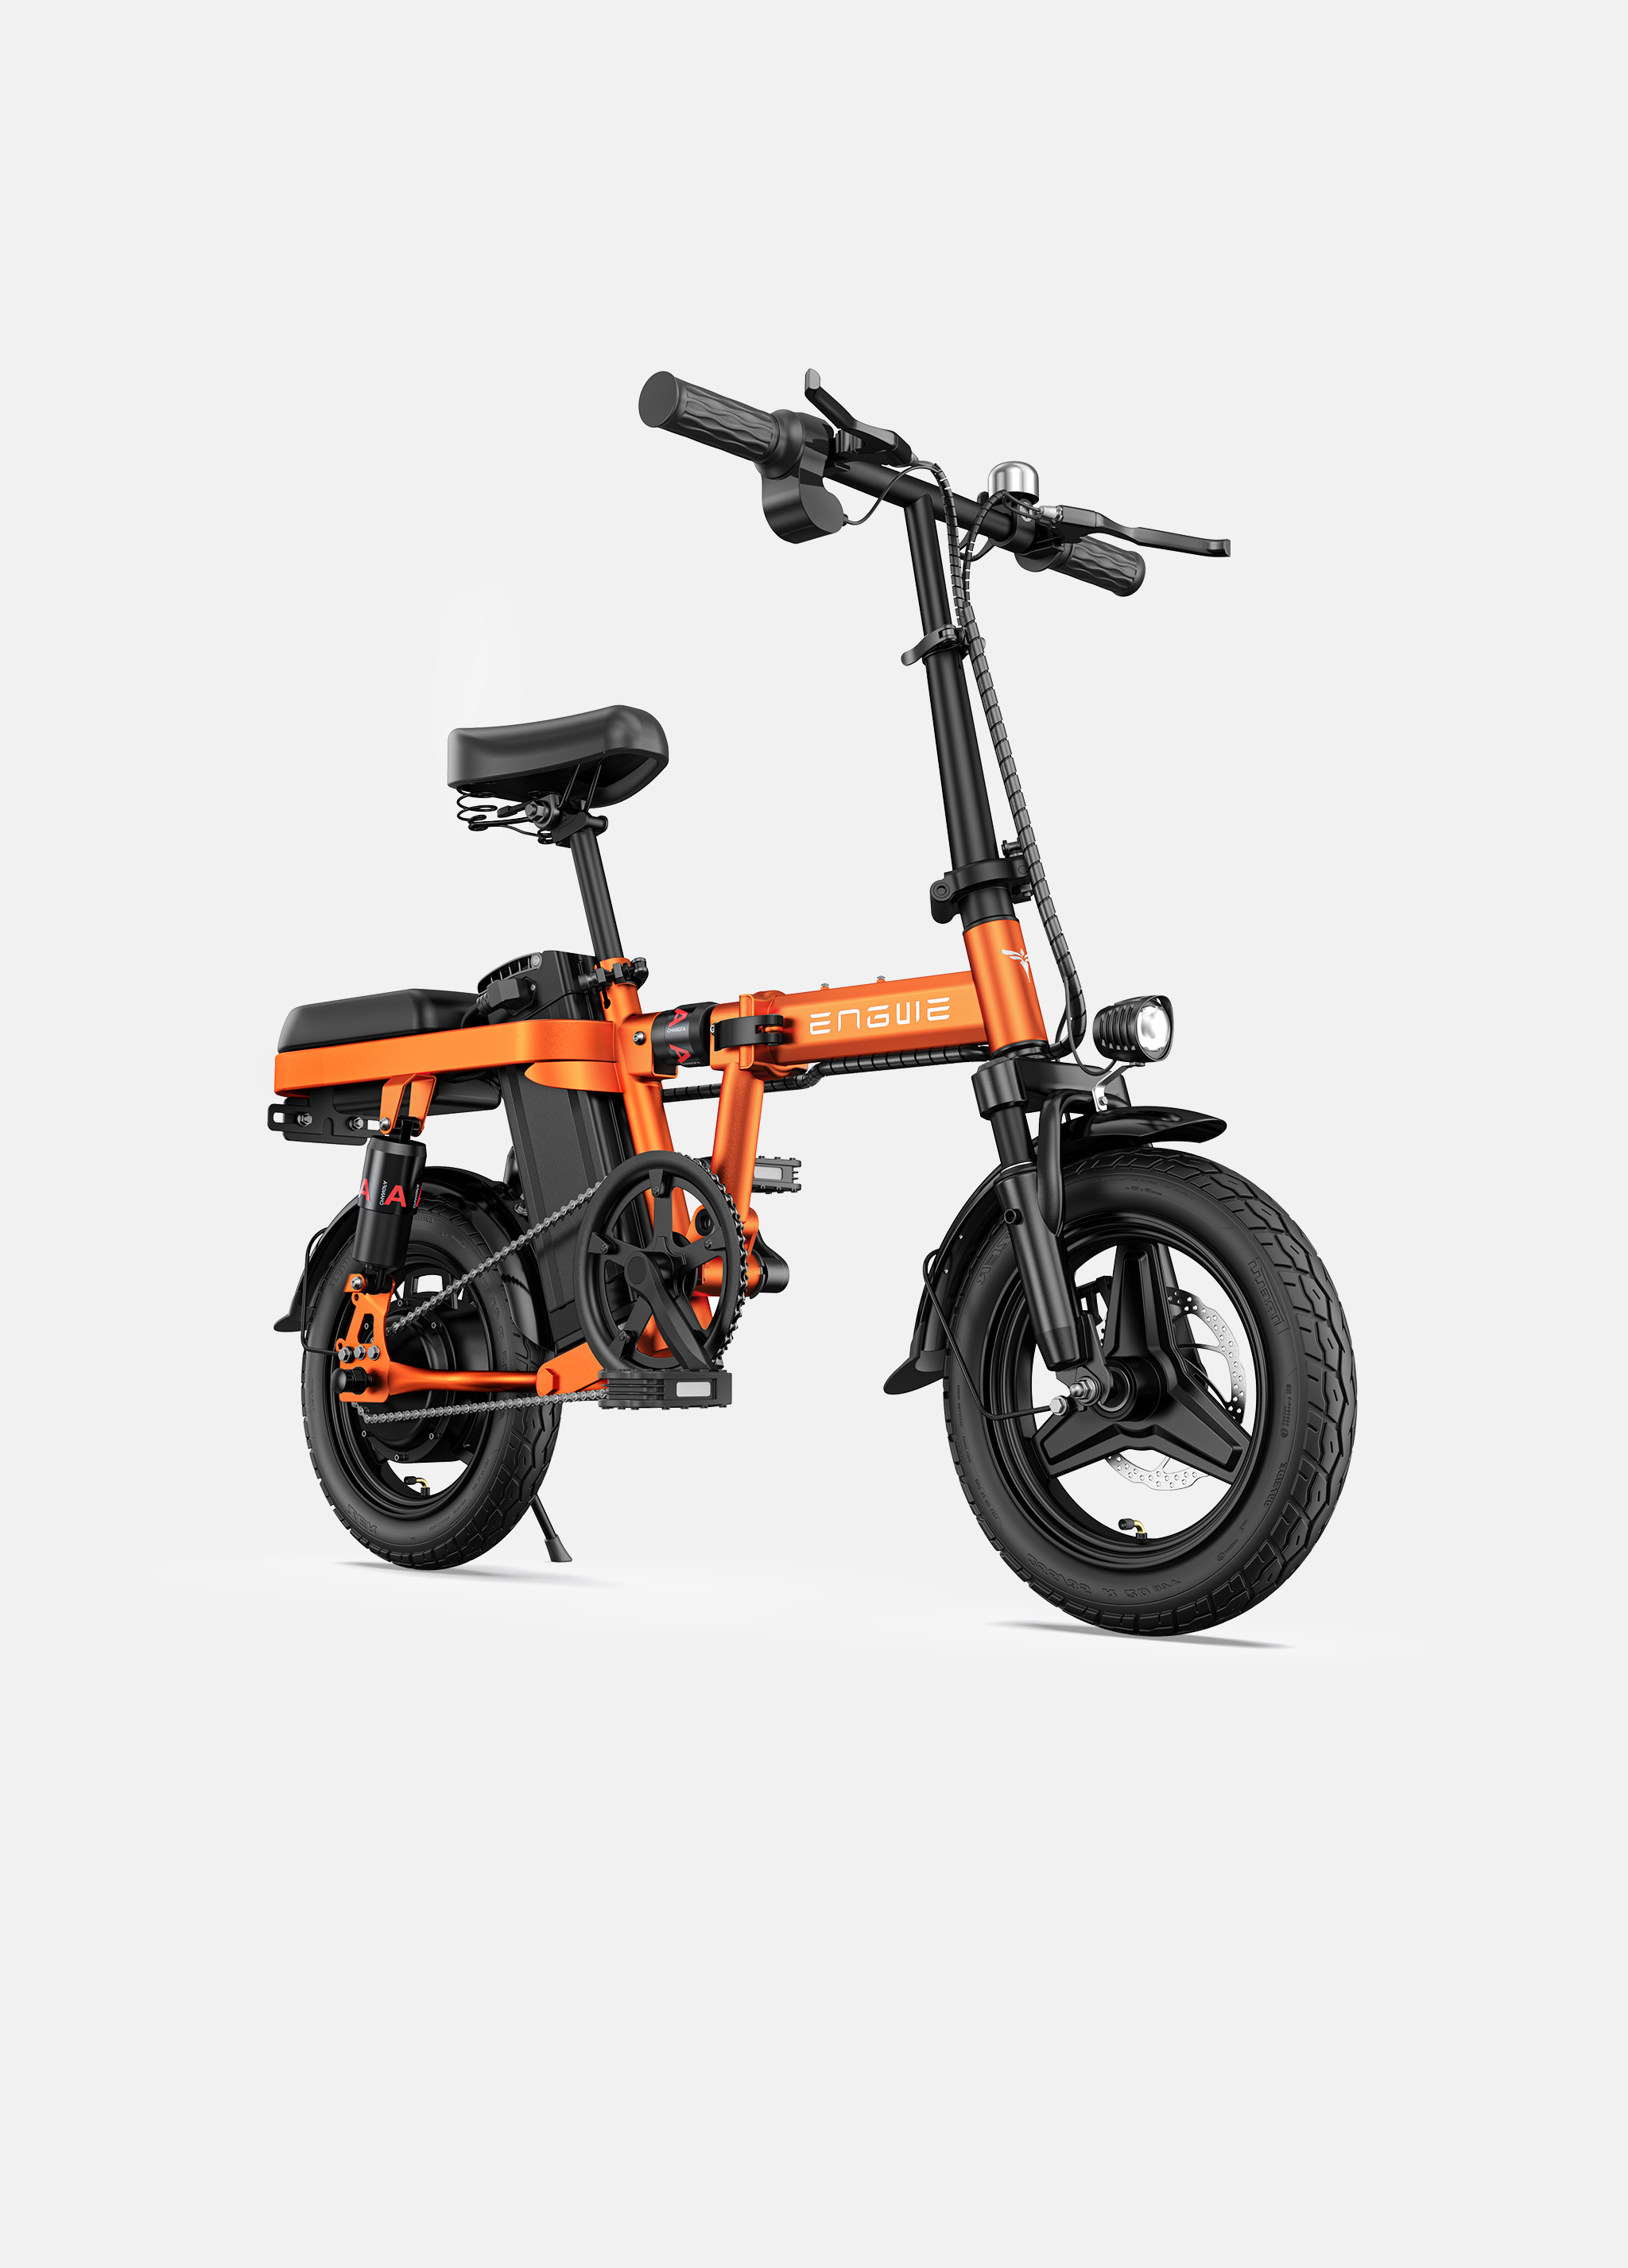 ENGWE Ebikes Electric Bicycles for Men Women Children City Ebike 250w 